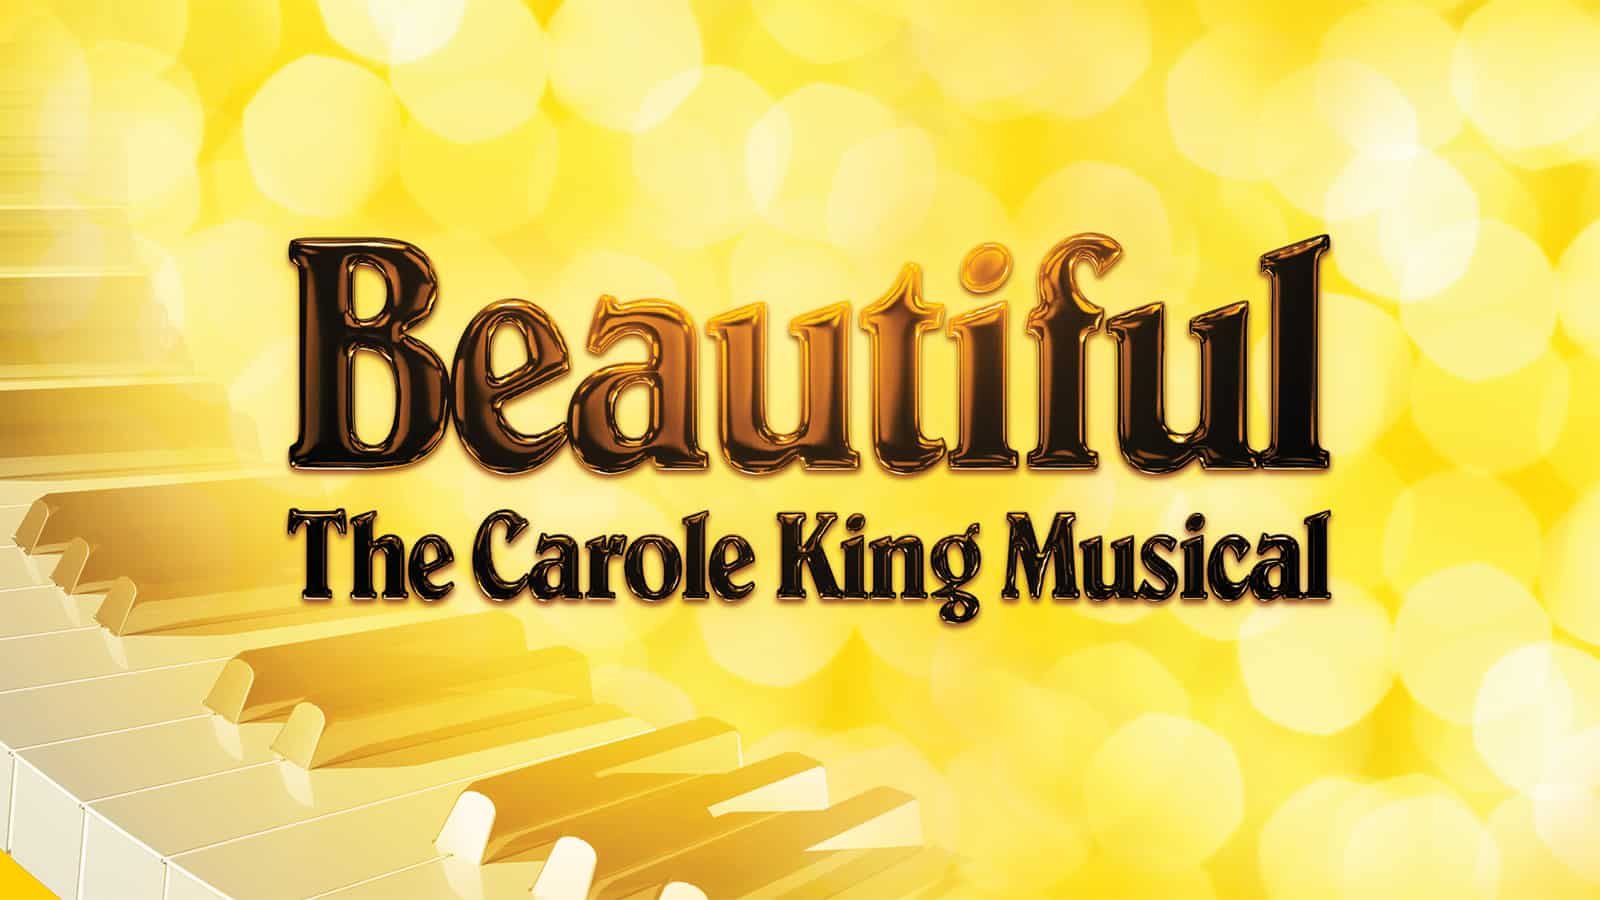 Beautiful: The Carole King Musical | Paramount Theatre